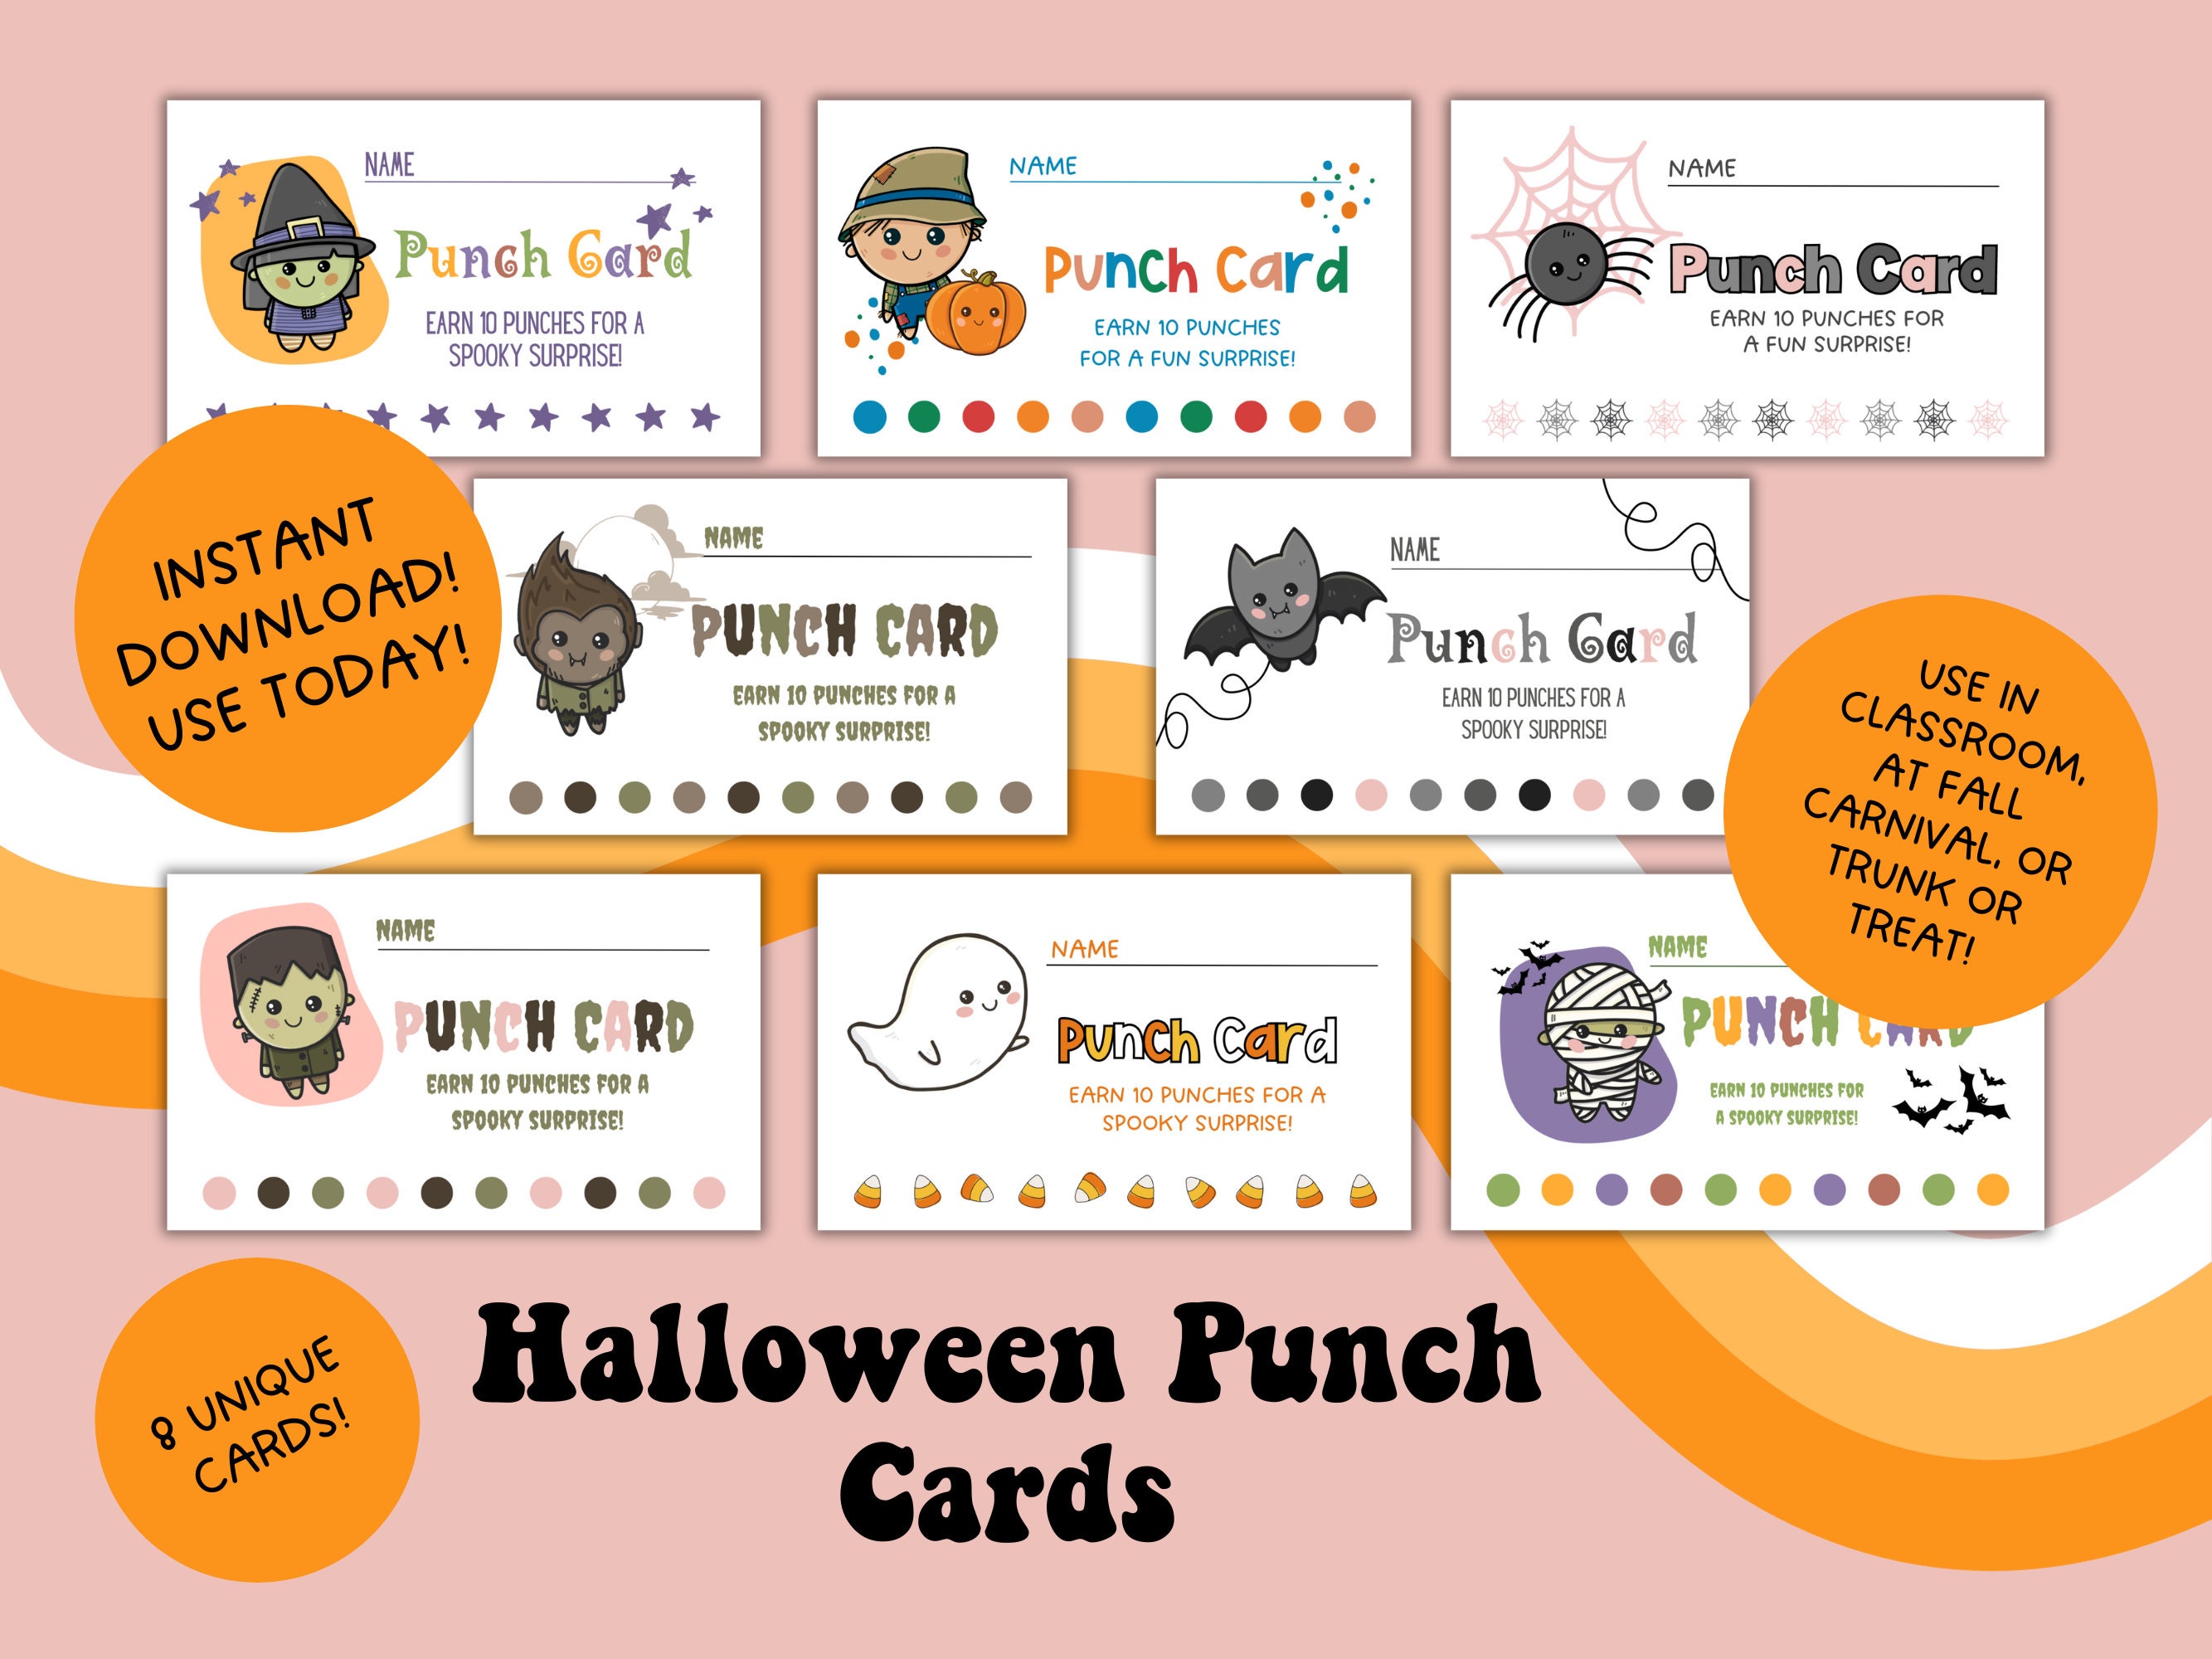  200 Pcs Punch Cards with Hole Puncher, Incentive Reward Card,  Space Theme, 3.5 x 2, Behavior Chart, Chore Card, Incentive Awards Card  for Kids Students Teachers Home Classroom School Business. 